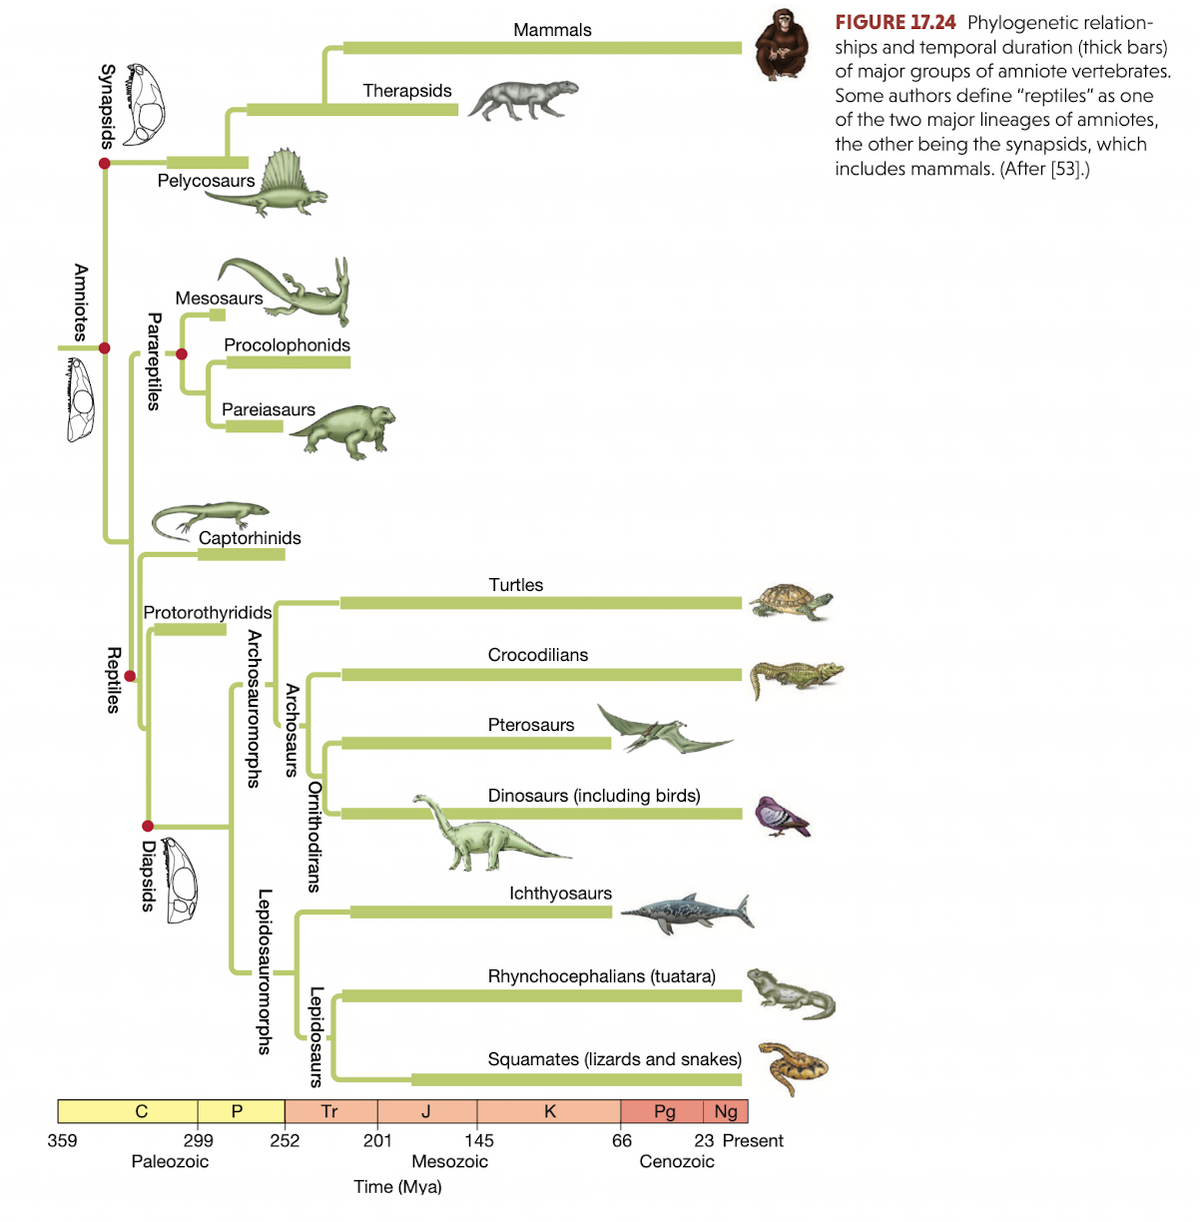 FIGURE 17.24 Phylogenetic relation-
ships and temporal duration (thick bars)
of major groups of amniote vertebrates.
Some authors define "reptiles" as one
of the two major lineages of amniotes,
the other being the synapsids, which
includes mammals. (After [53].)
Mammals
Therapsids
Pelycosaurs
Mesosaurs
Procolophonids
Pareiasaurs
Captorhinids
Turtles
Protorothyridids
Crocodilians
Pterosaurs
Dinosaurs (including birds)
Ichthyosaurs
Rhynchocephalians (tuatara)
Squamates (lizards and snakes)
C
P
Tr
K
Pg
Ng
359
299
252
201
145
66
23 Present
Paleozoic
Mesozoic
Cenozoic
Time (Mya)
JOrnithodirans
Lepidosaurs
Archosaurs
Lepidosauromorphs
Archosauromorphs
Parareptiles
Diapsids
Reptiles
Synapsids
Amniotes
